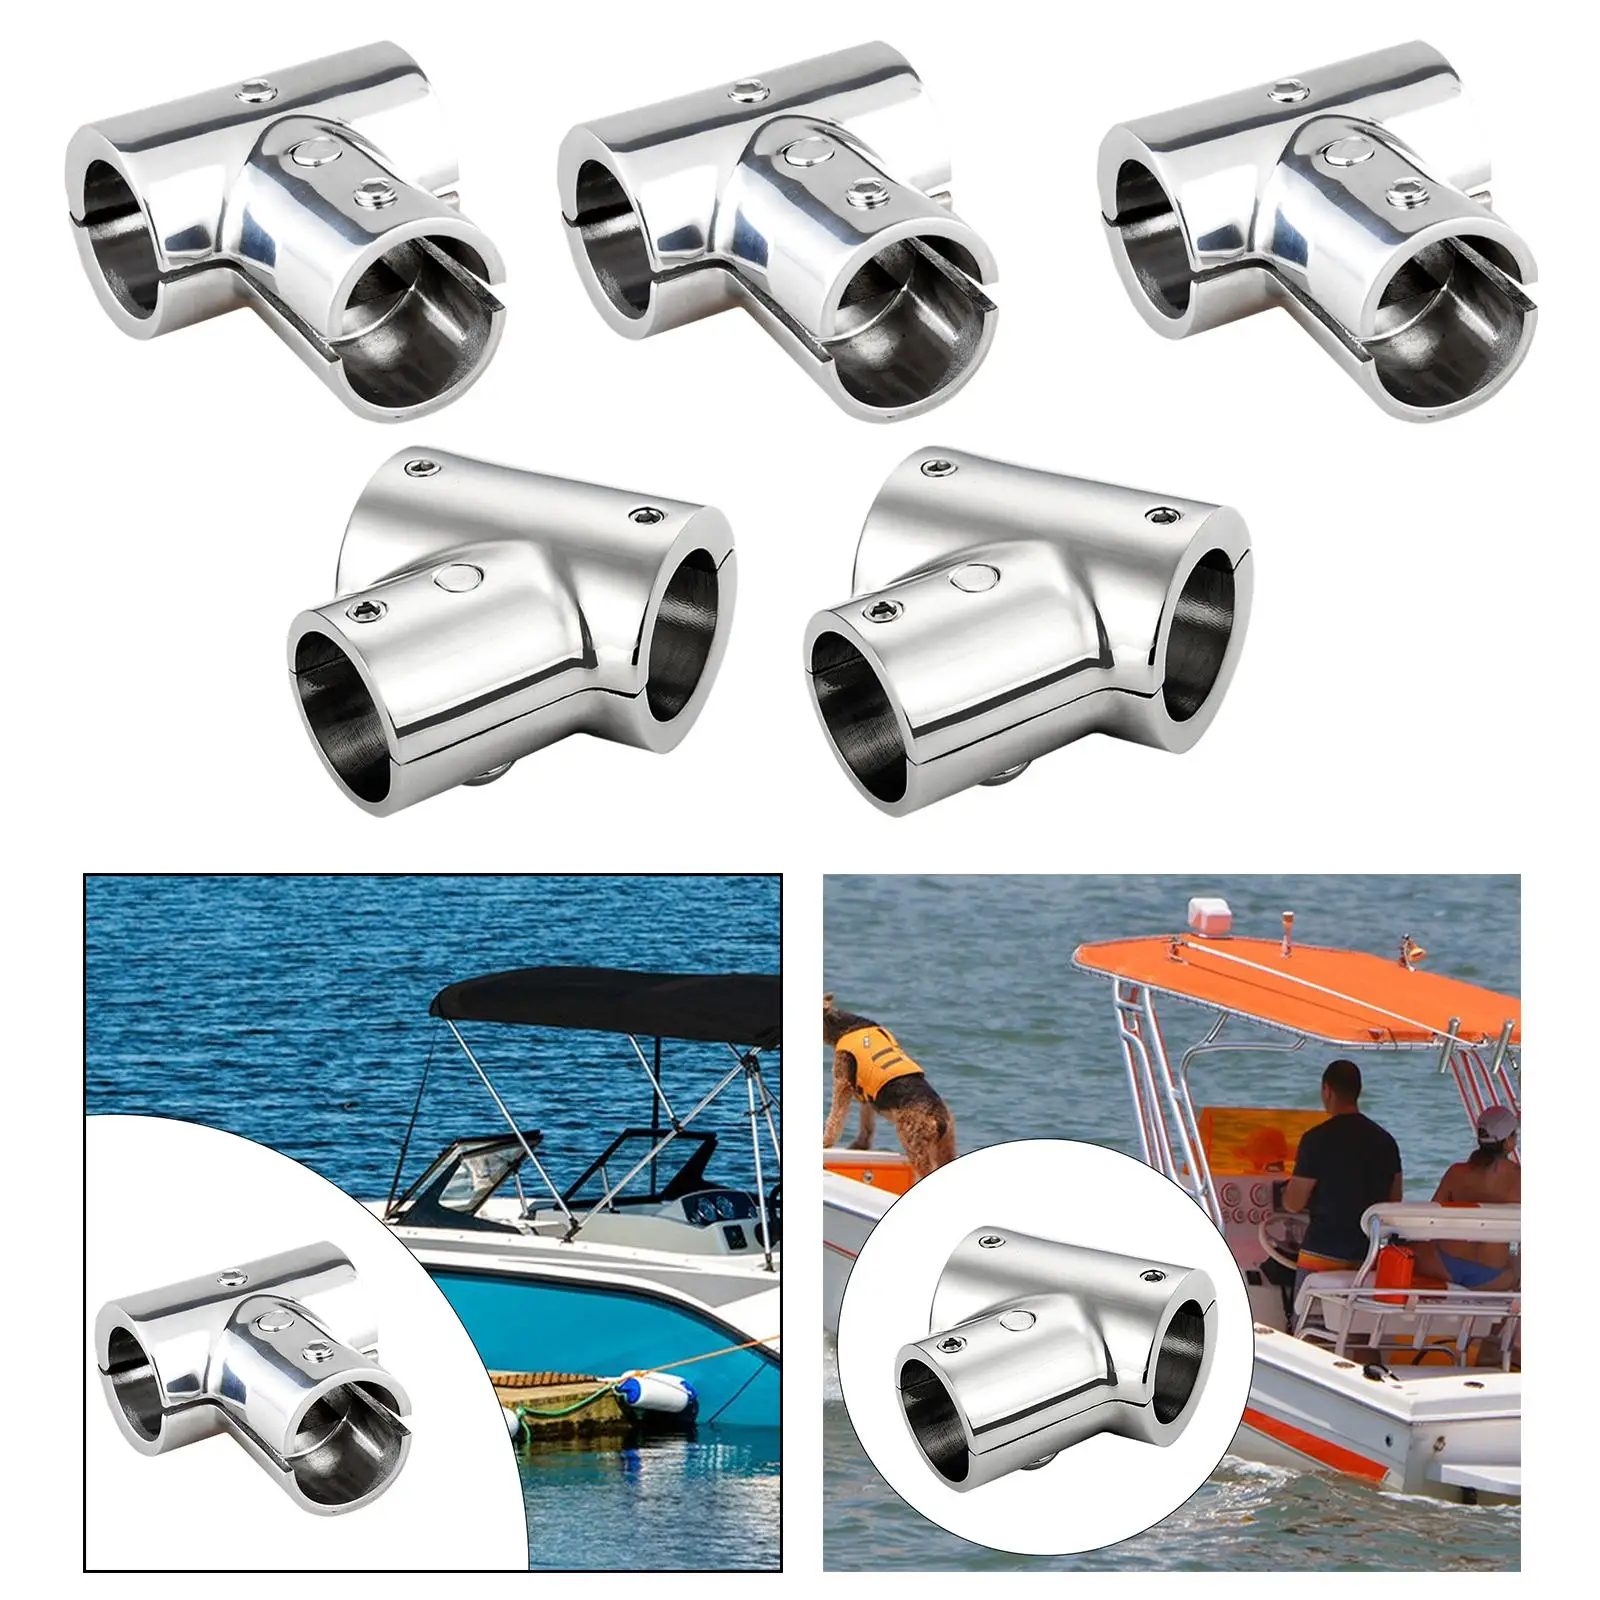 Boat Hardware,Boat Railing Pipe,3 Way Polished Surface,Boat Handrail Fitting,Boat Tee Connector for Ship Deck,Marine Sailboat